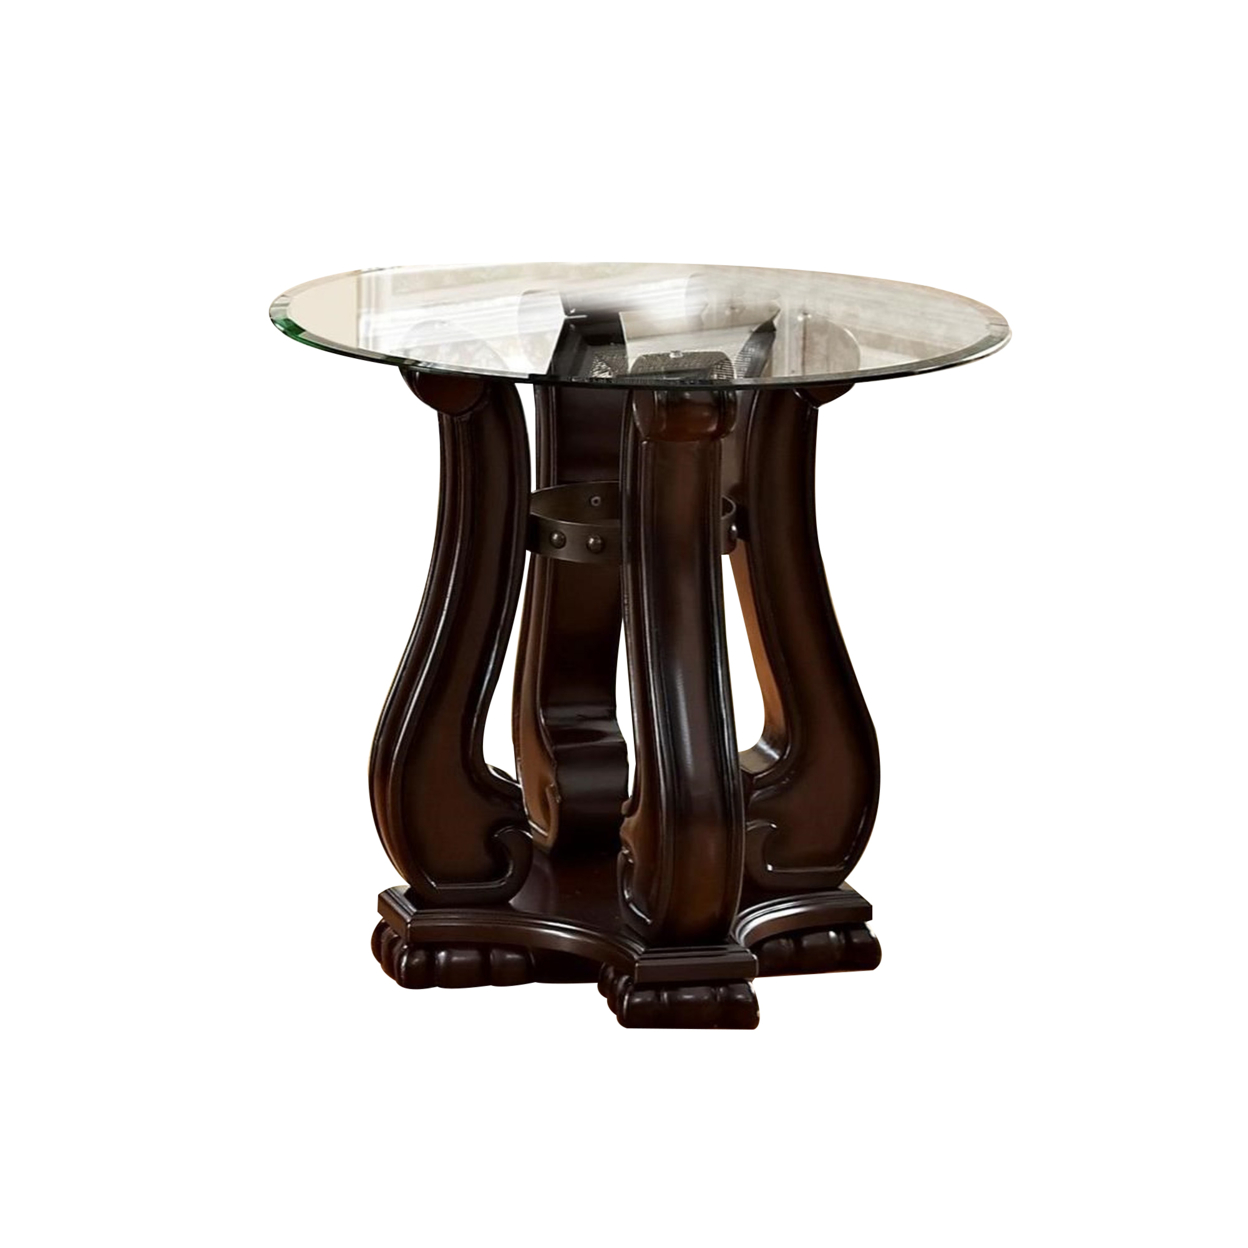 End Table With Round Glass Top And Scrolled Body, Brown- Saltoro Sherpi